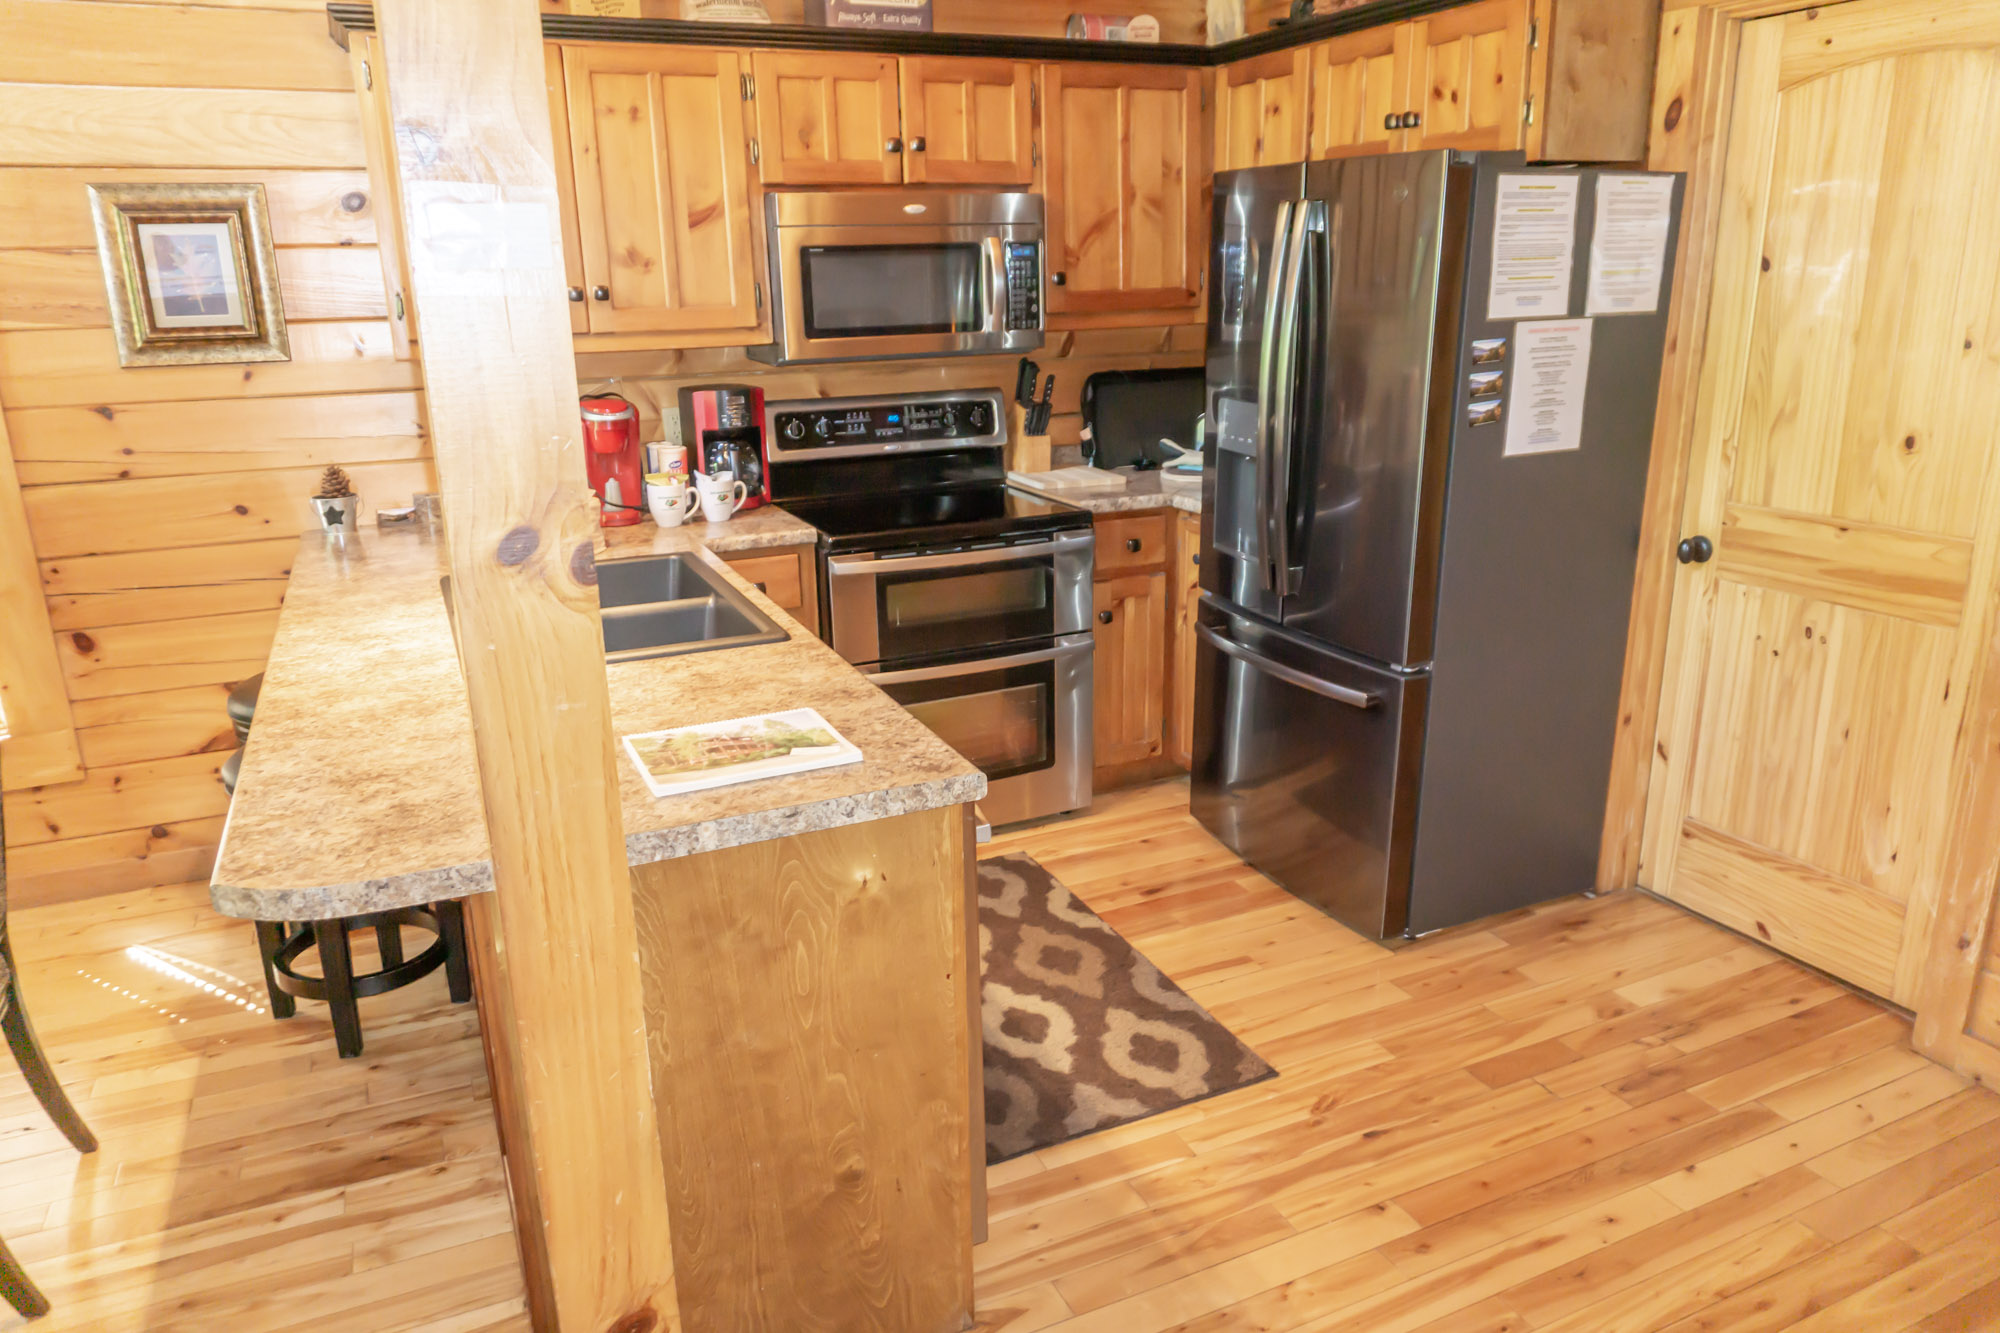 Fully stocked kitchen.  Check the amenities list.